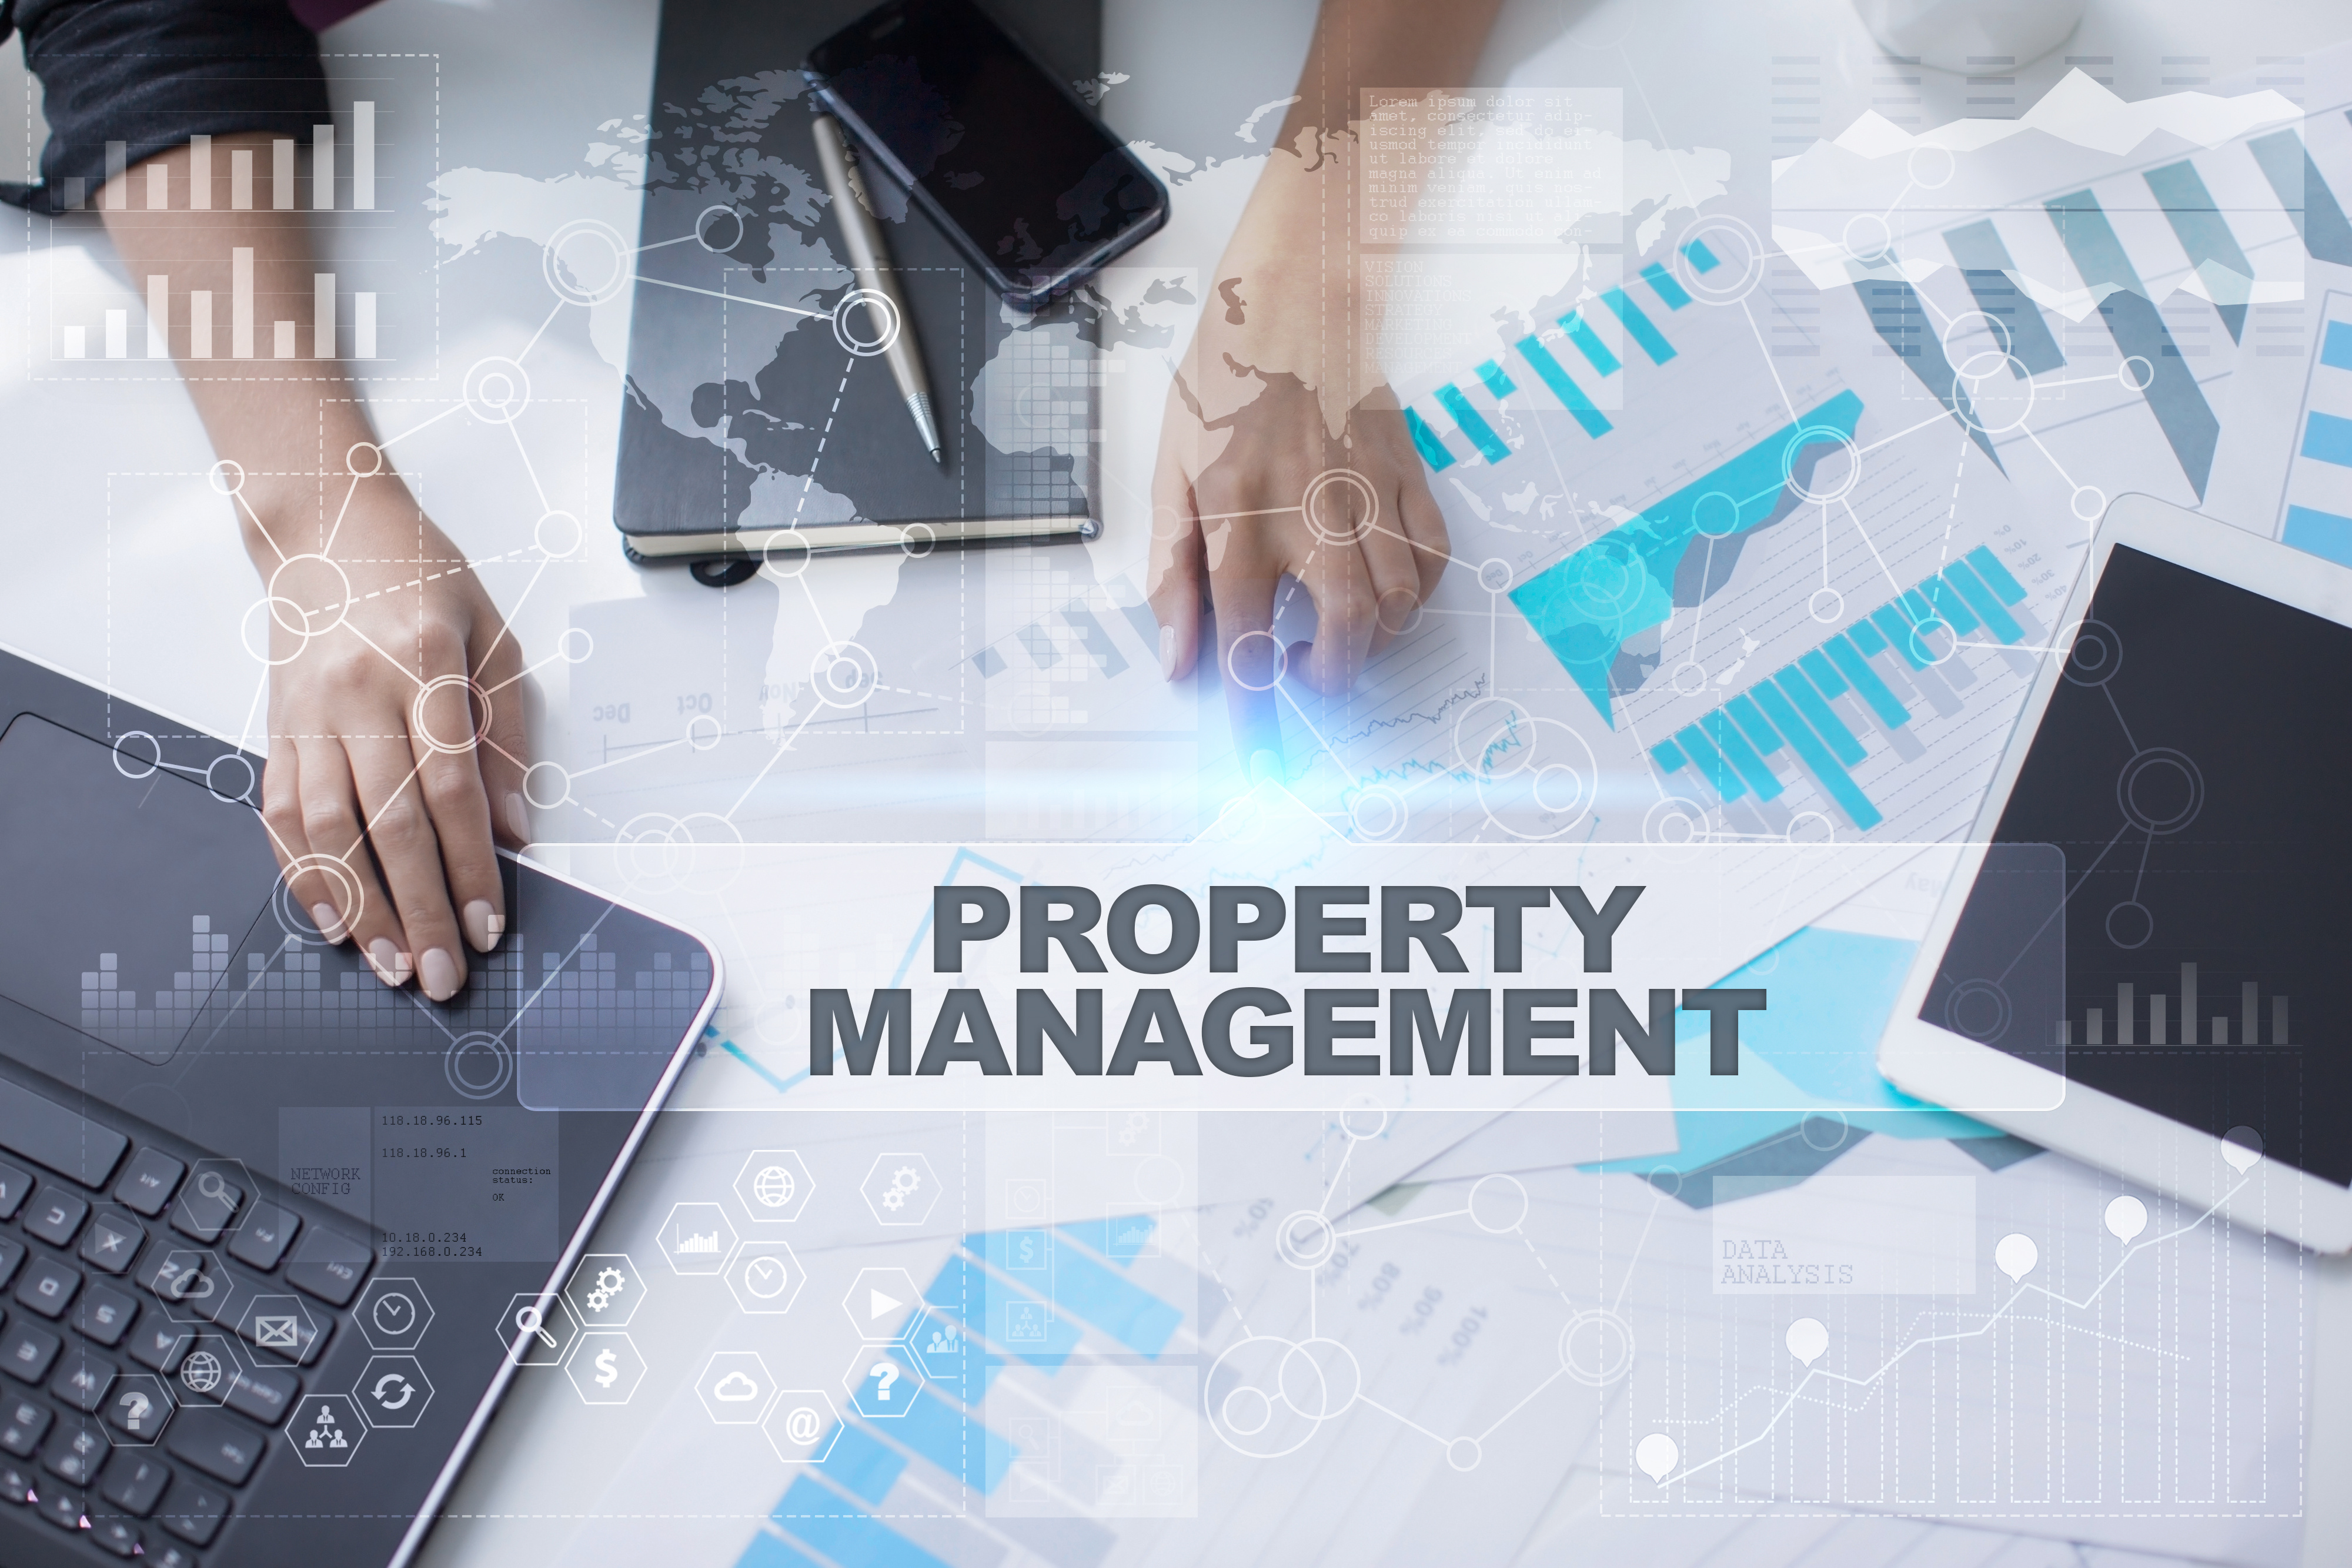 Integrated payments are transforming property management